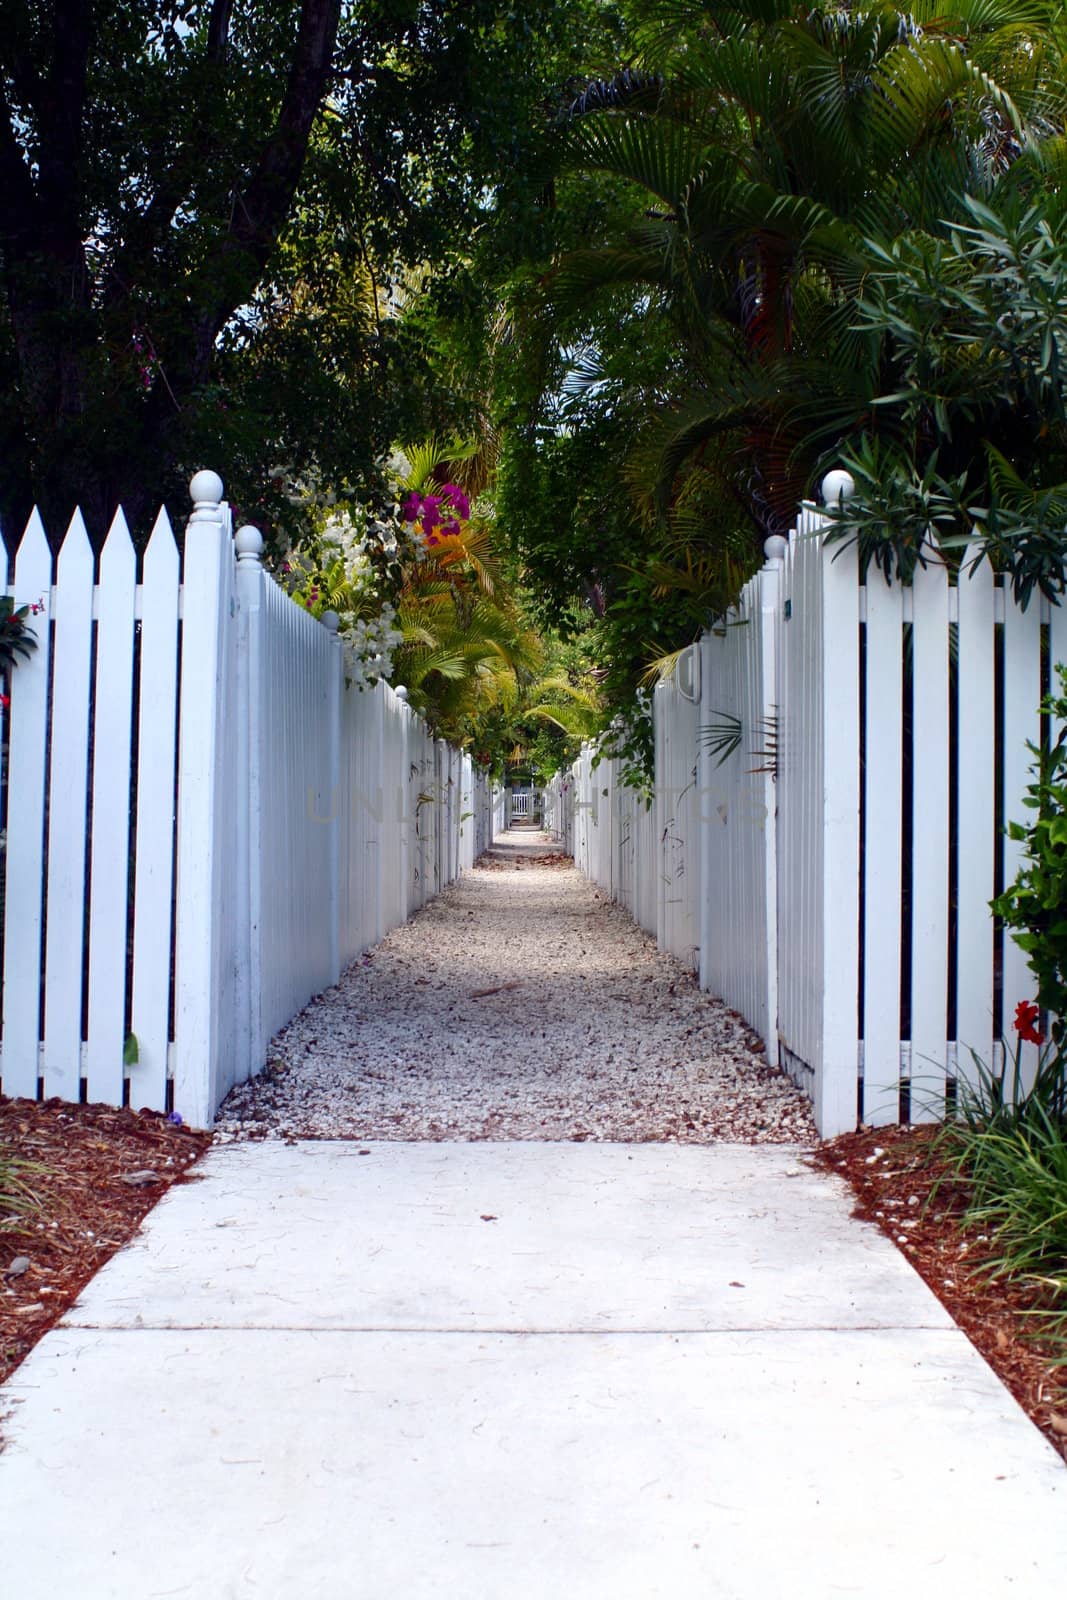 A walkway lined by white picket fences and tropical foliage